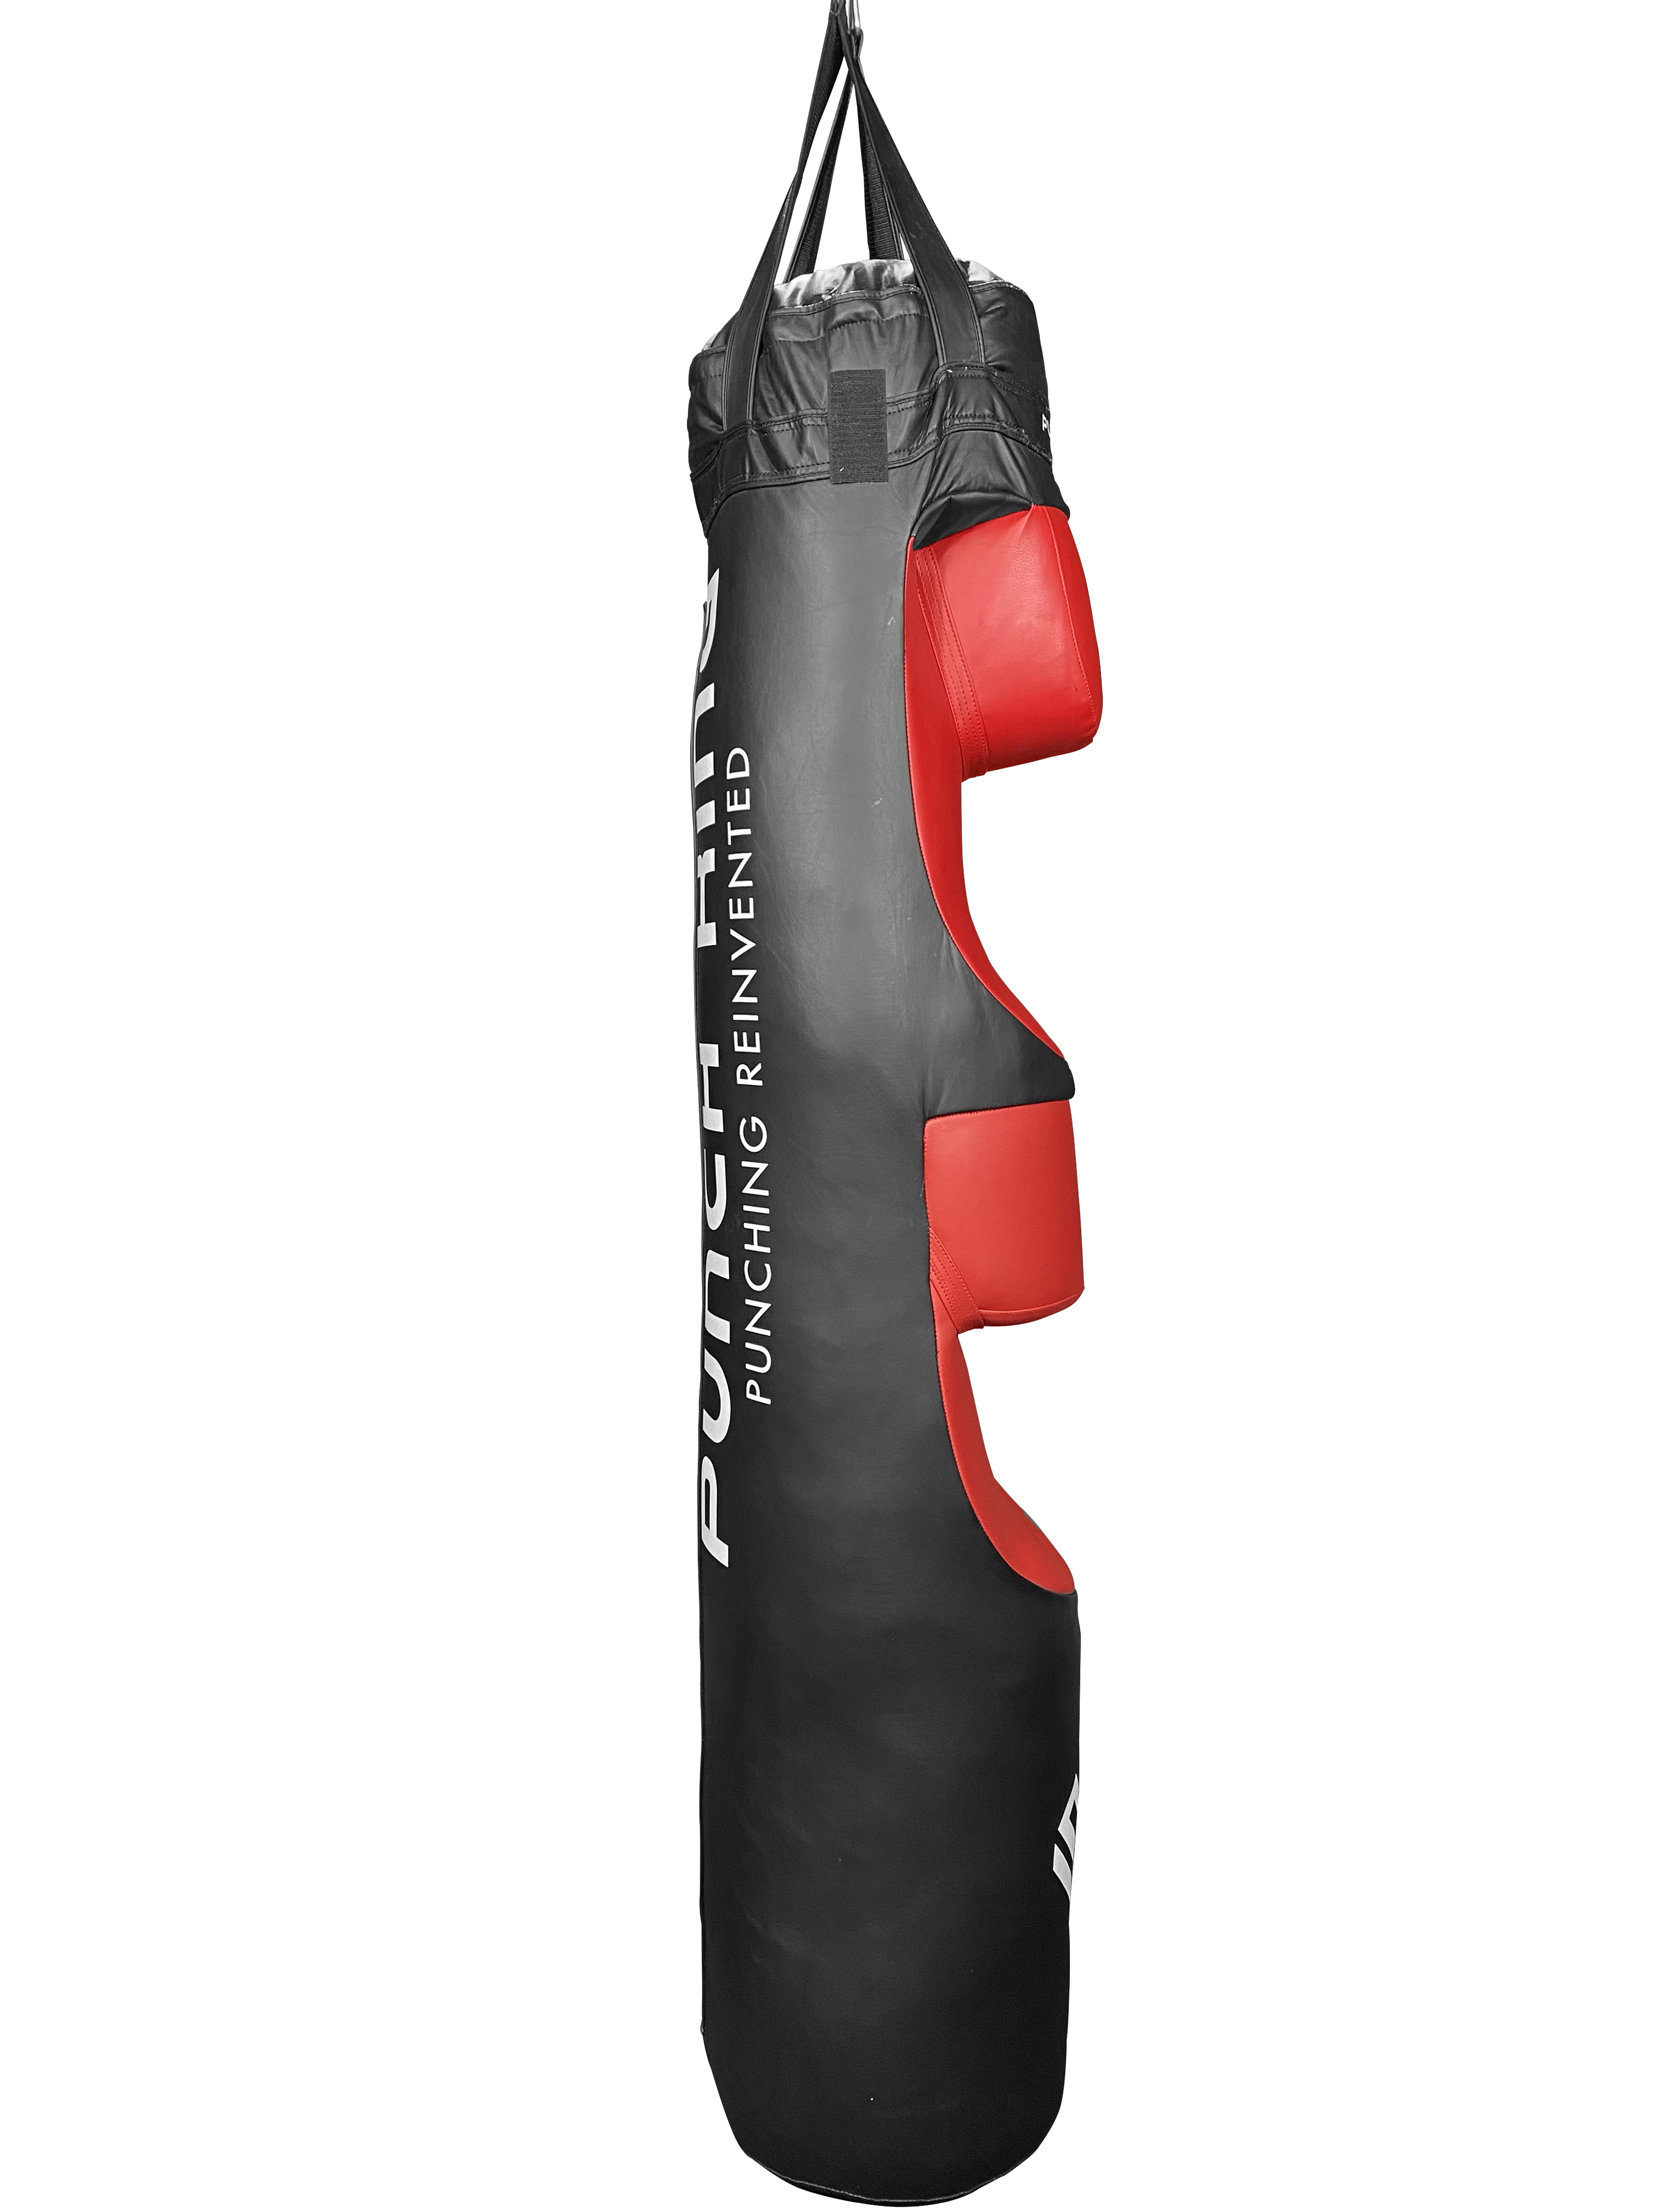 CLEARANCE - 6Ft 120lb Punch King Heavy Punching Bag